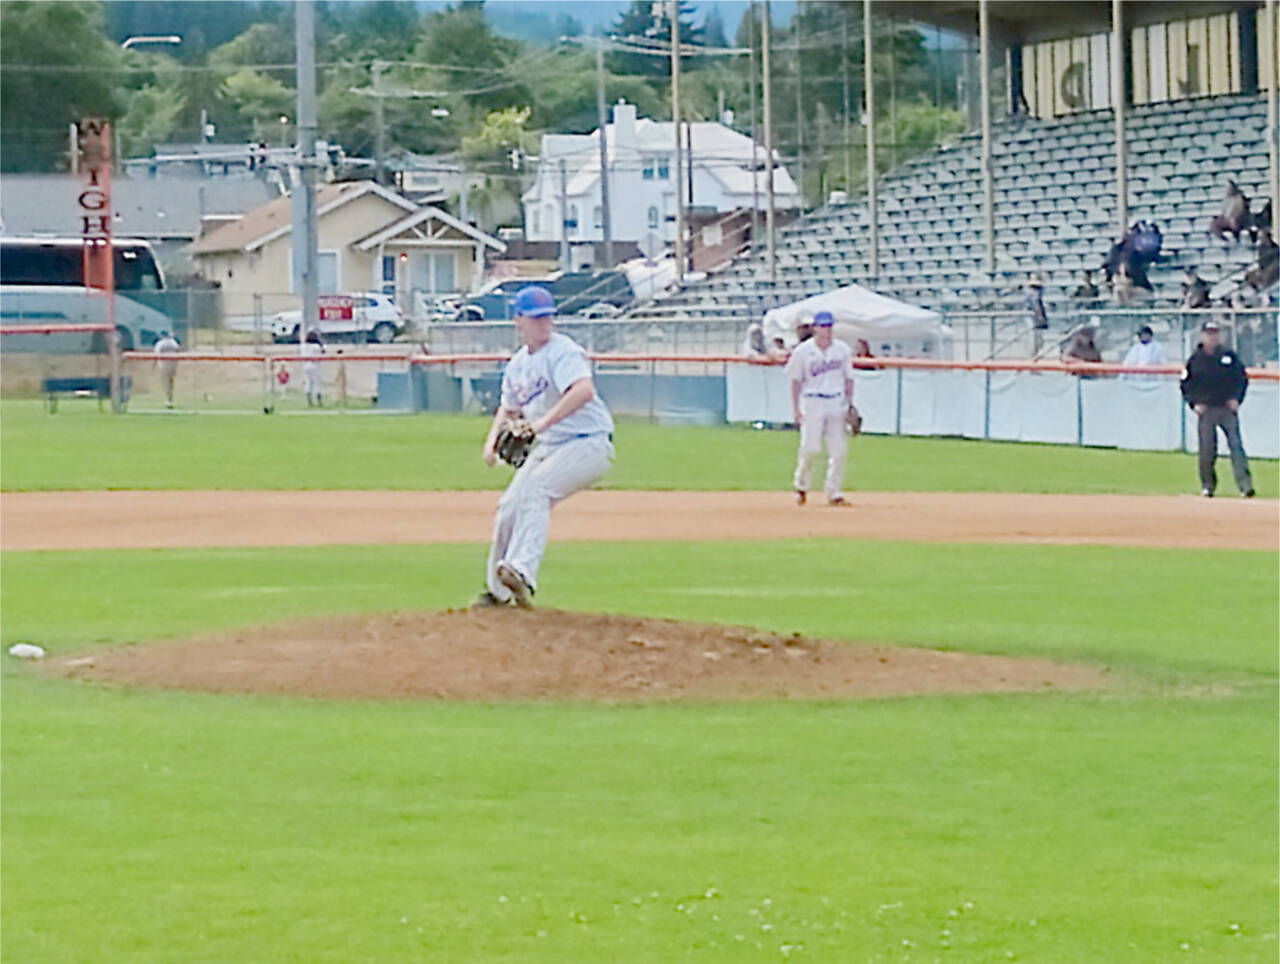 Colby Scheuber of Ocosta High School and Grays Harbor College, was the top pitcher for the Port Angeles Lefties this season, finishing with an ERA of 2.16, second-best in the West Coast League. (Pierre LaBossiere/Peninsula Daily News)